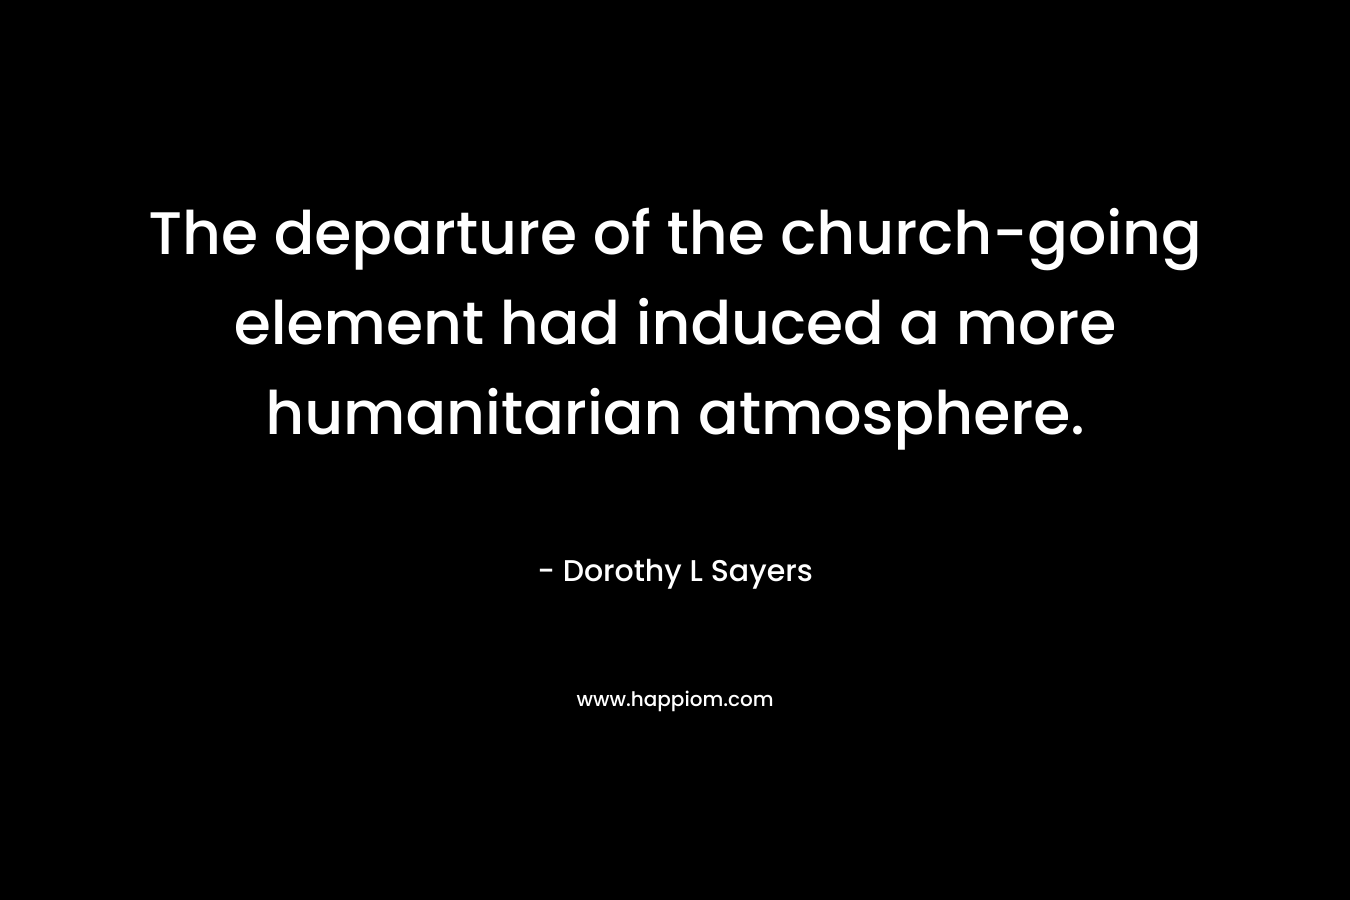 The departure of the church-going element had induced a more humanitarian atmosphere. – Dorothy L Sayers